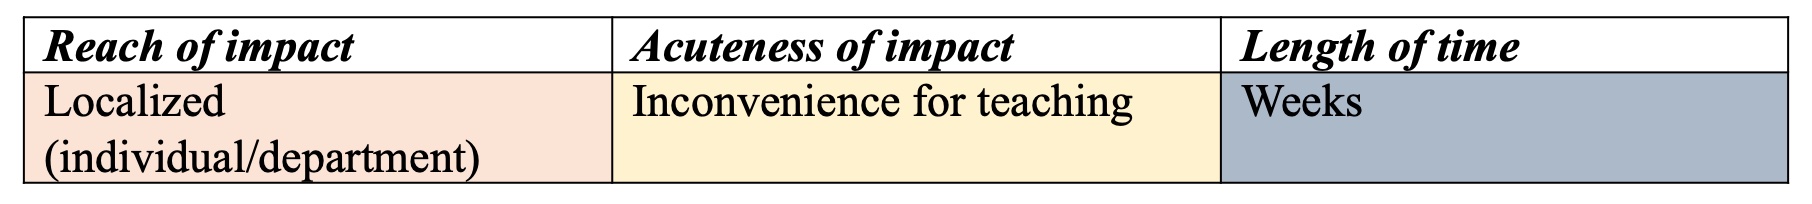 A table with three columns and one row. The columns are labeled from left to right: Reach of Impact, Acuteness of Impact, and Length of Time. From left to right the descriptions under each of these columns is: Localized (individual/department), Inconvenience for teaching, and Weeks.